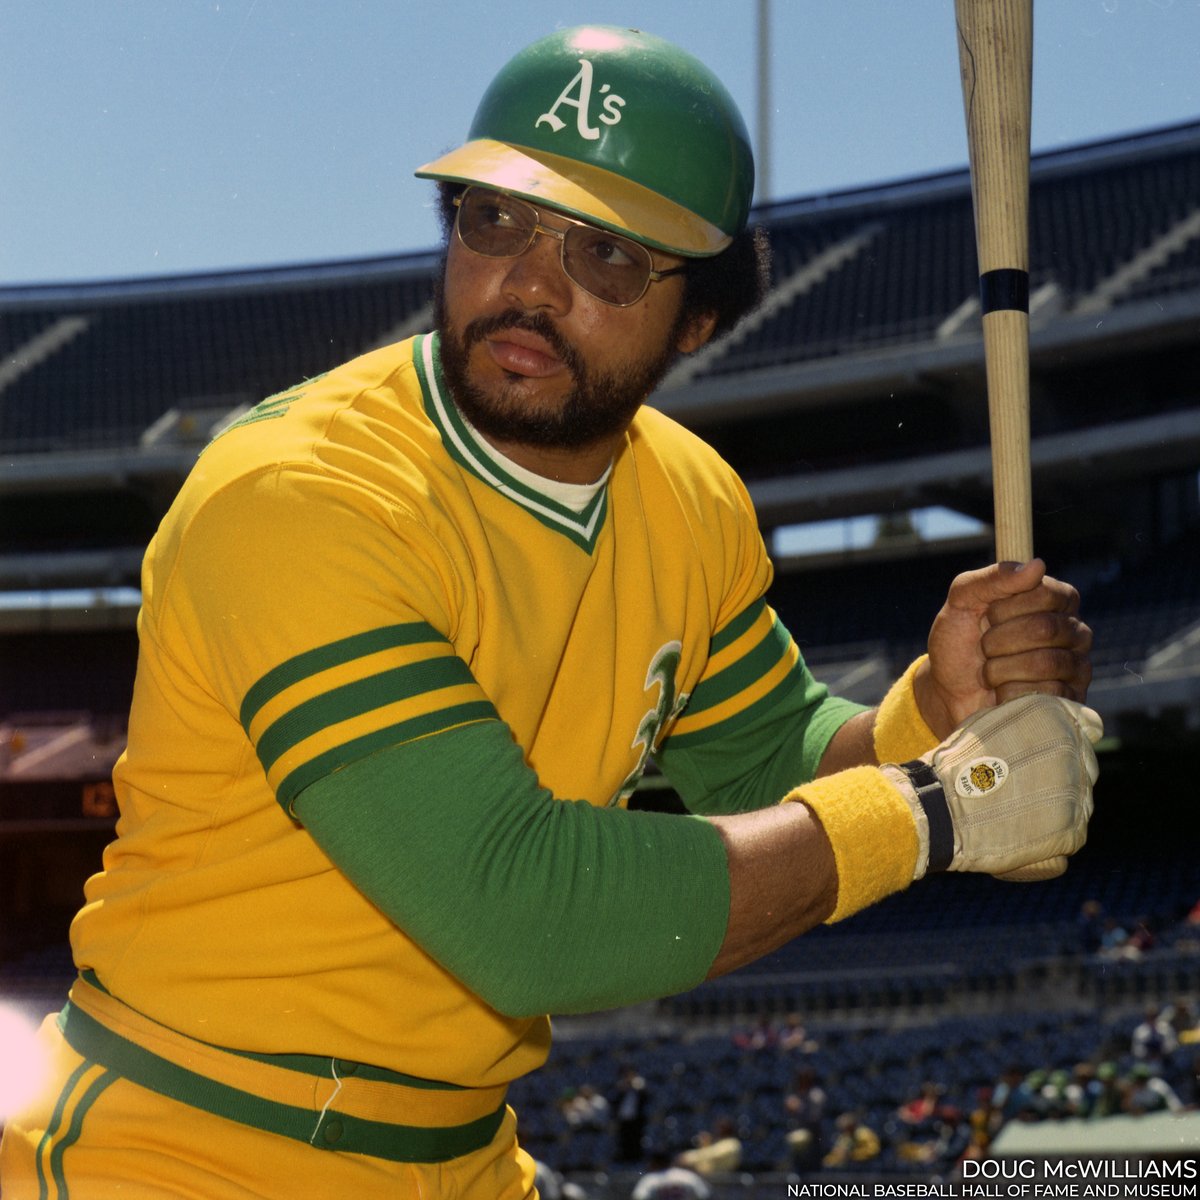 Did you know Reggie Jackson was the first player to amass 100 or more home runs with three different clubs? Help us wish @mroctober a happy birthday!